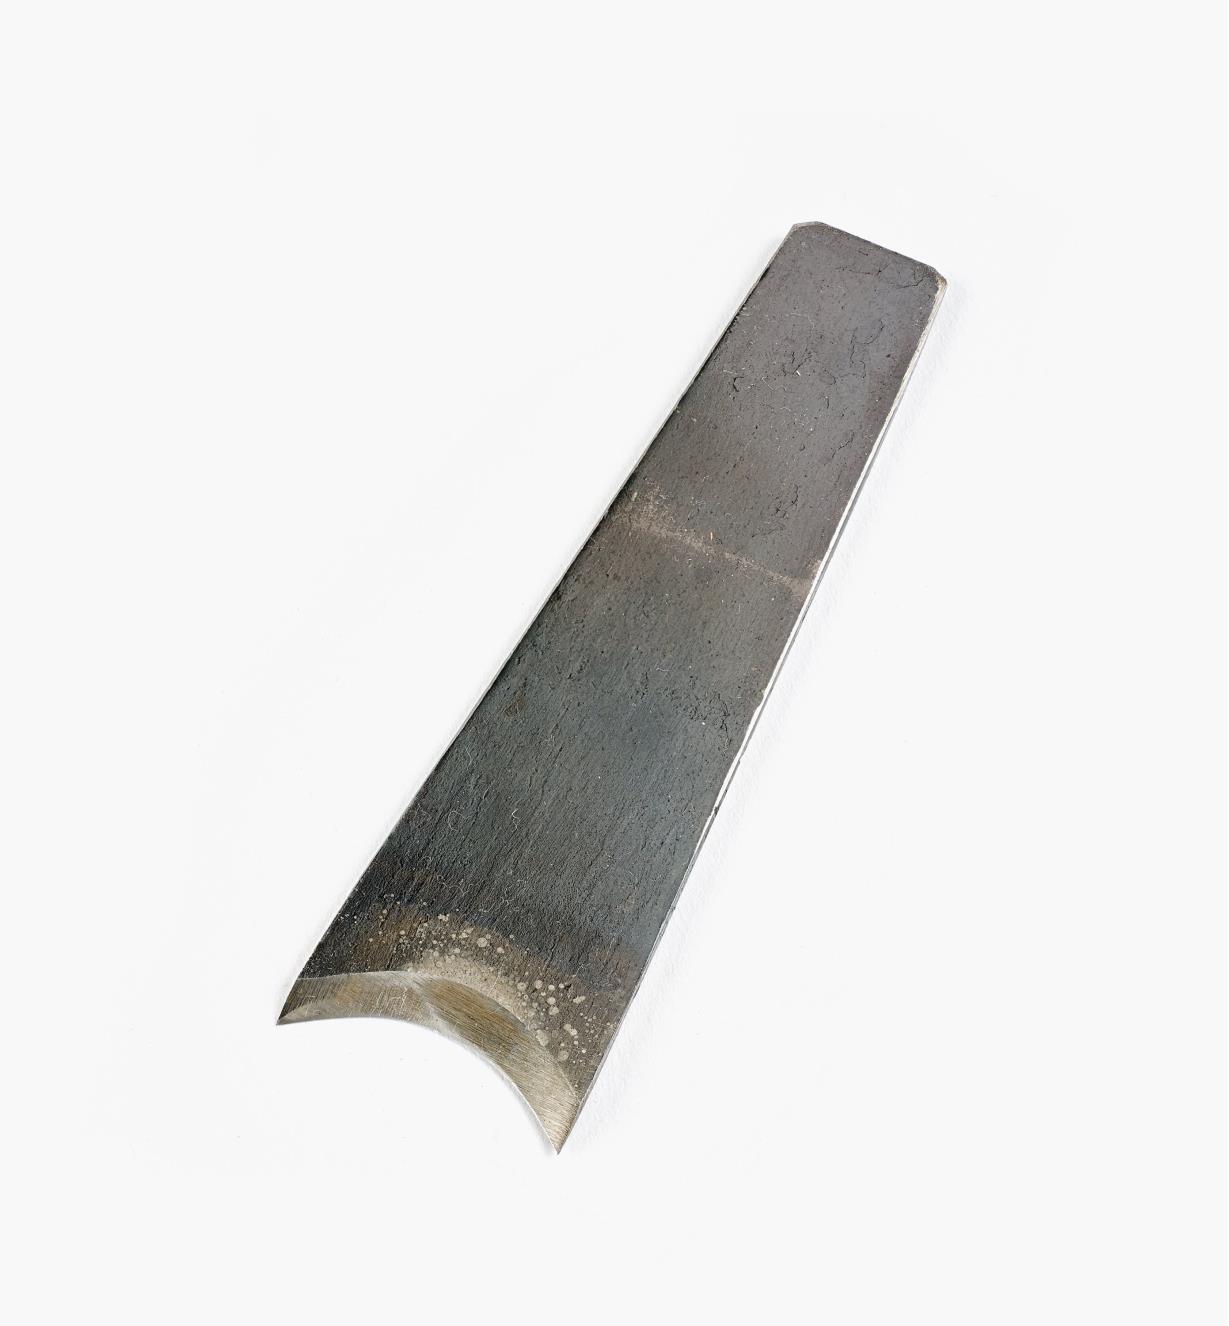 07P1629 - Replacement Blade for 32mm Hollow Plane